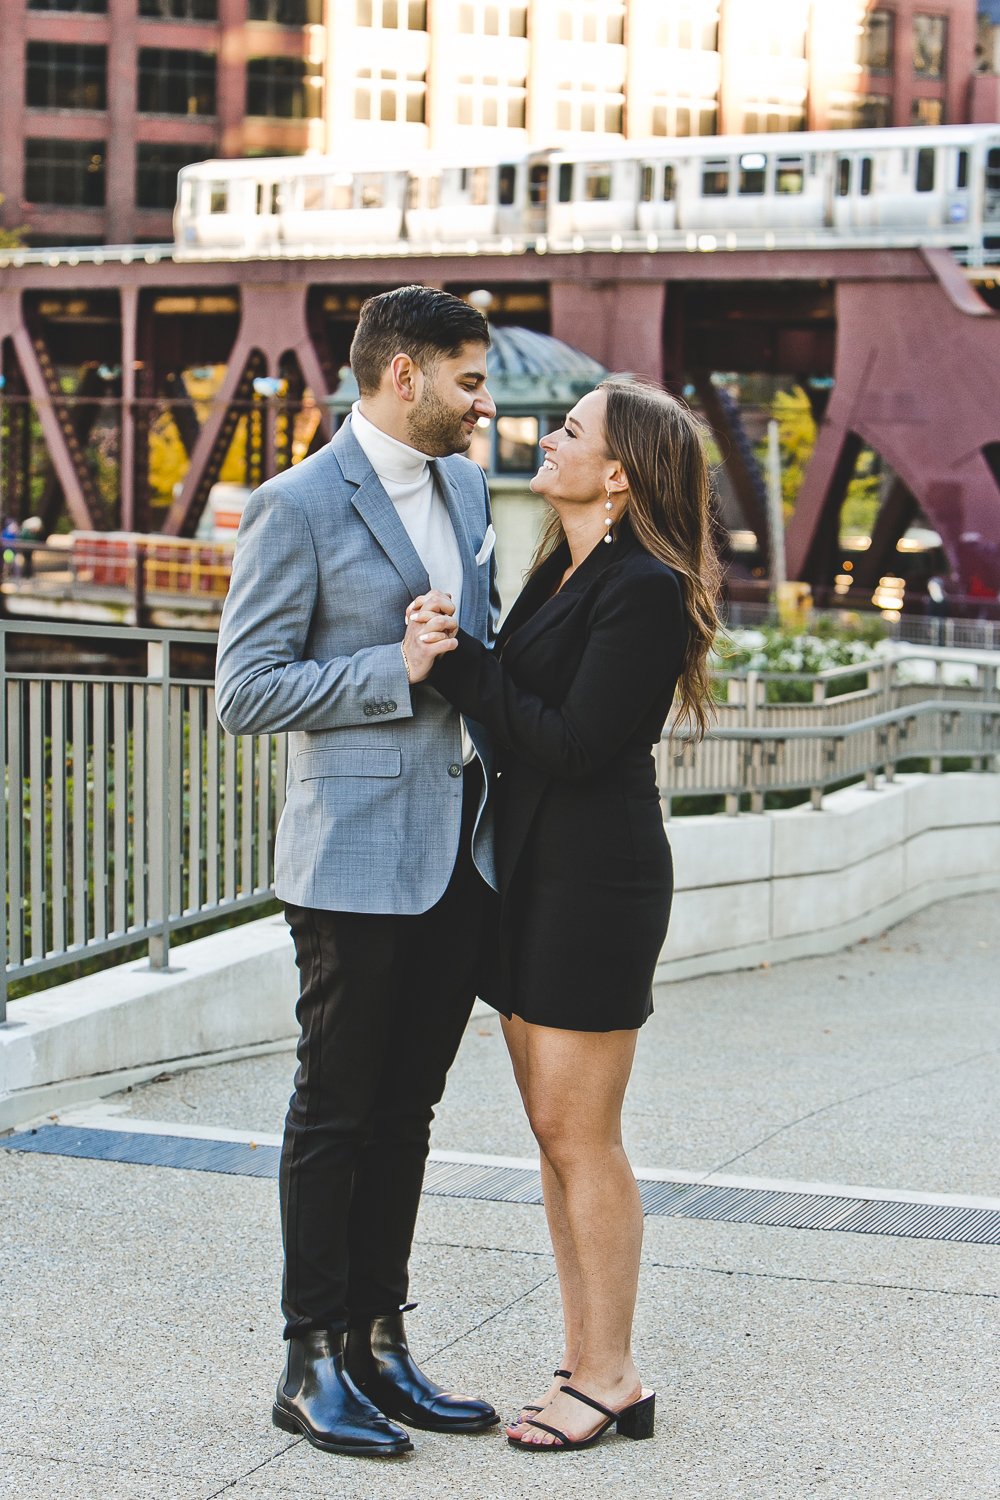 Downtown Chicago Engagement Session_JPP Studios_TaylorKlaus_17.JPG